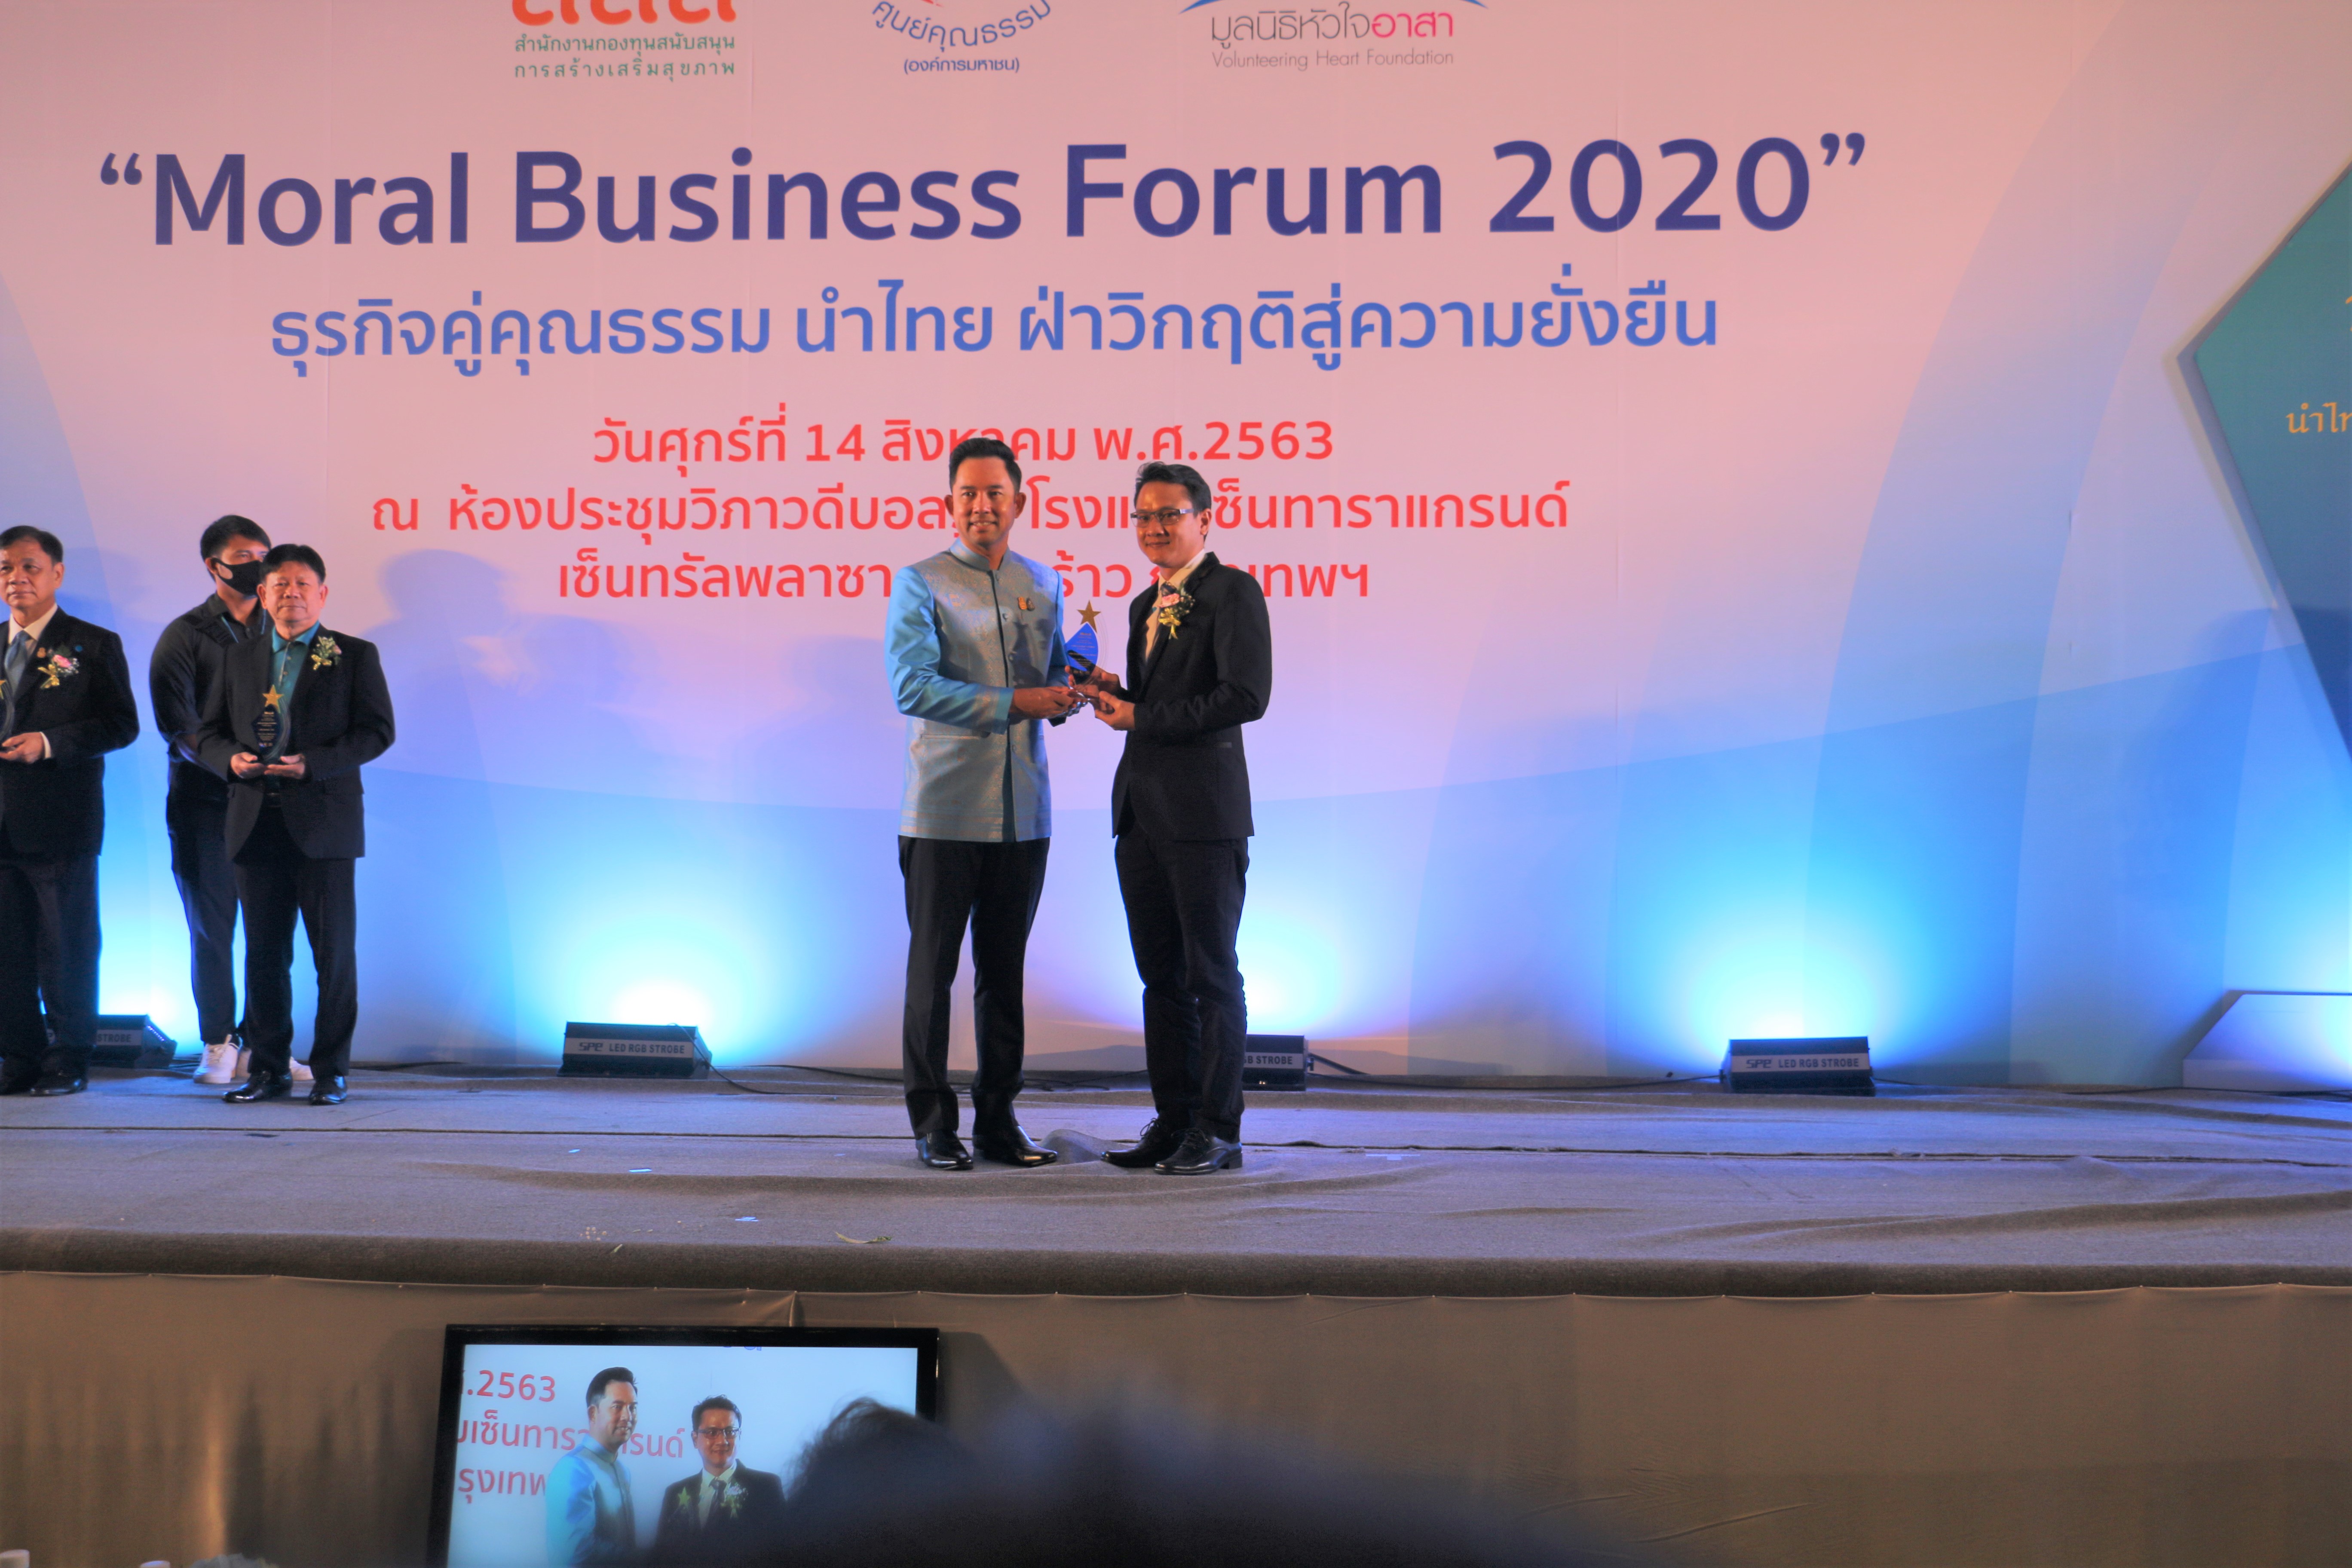 KSL WAS AWARDED MORAL BUSINESS PRIZE 2020 BY THE THAI HEALTH PROMOTION FOUNDATION COLLABORATING WITH THE MORAL PROMOTION CENTER AND THE VOLUNTEERING HEART FOUNDATION